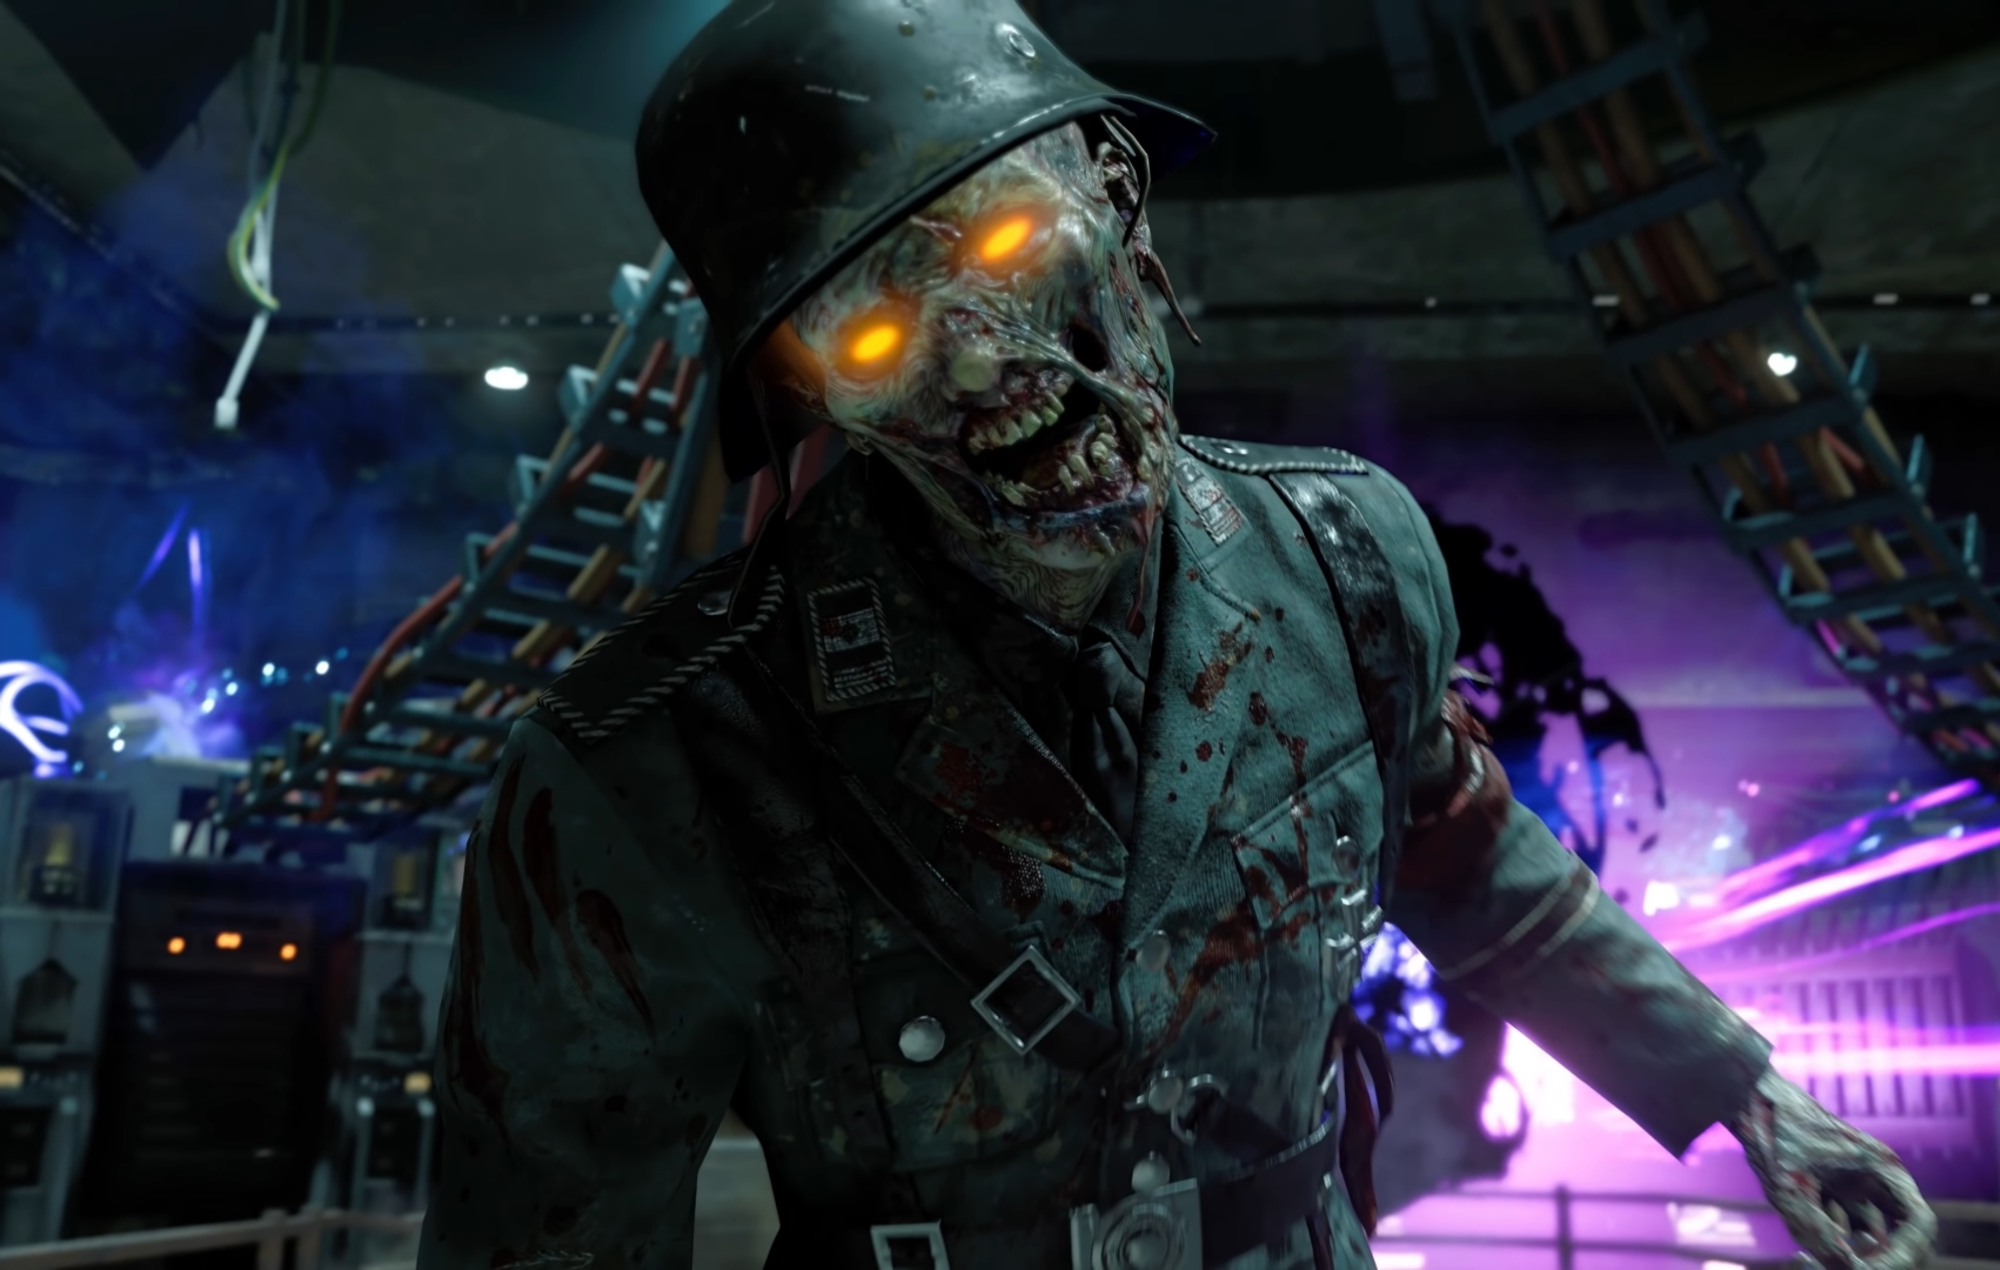 Call of Duty: Vanguard shows off its Zombies